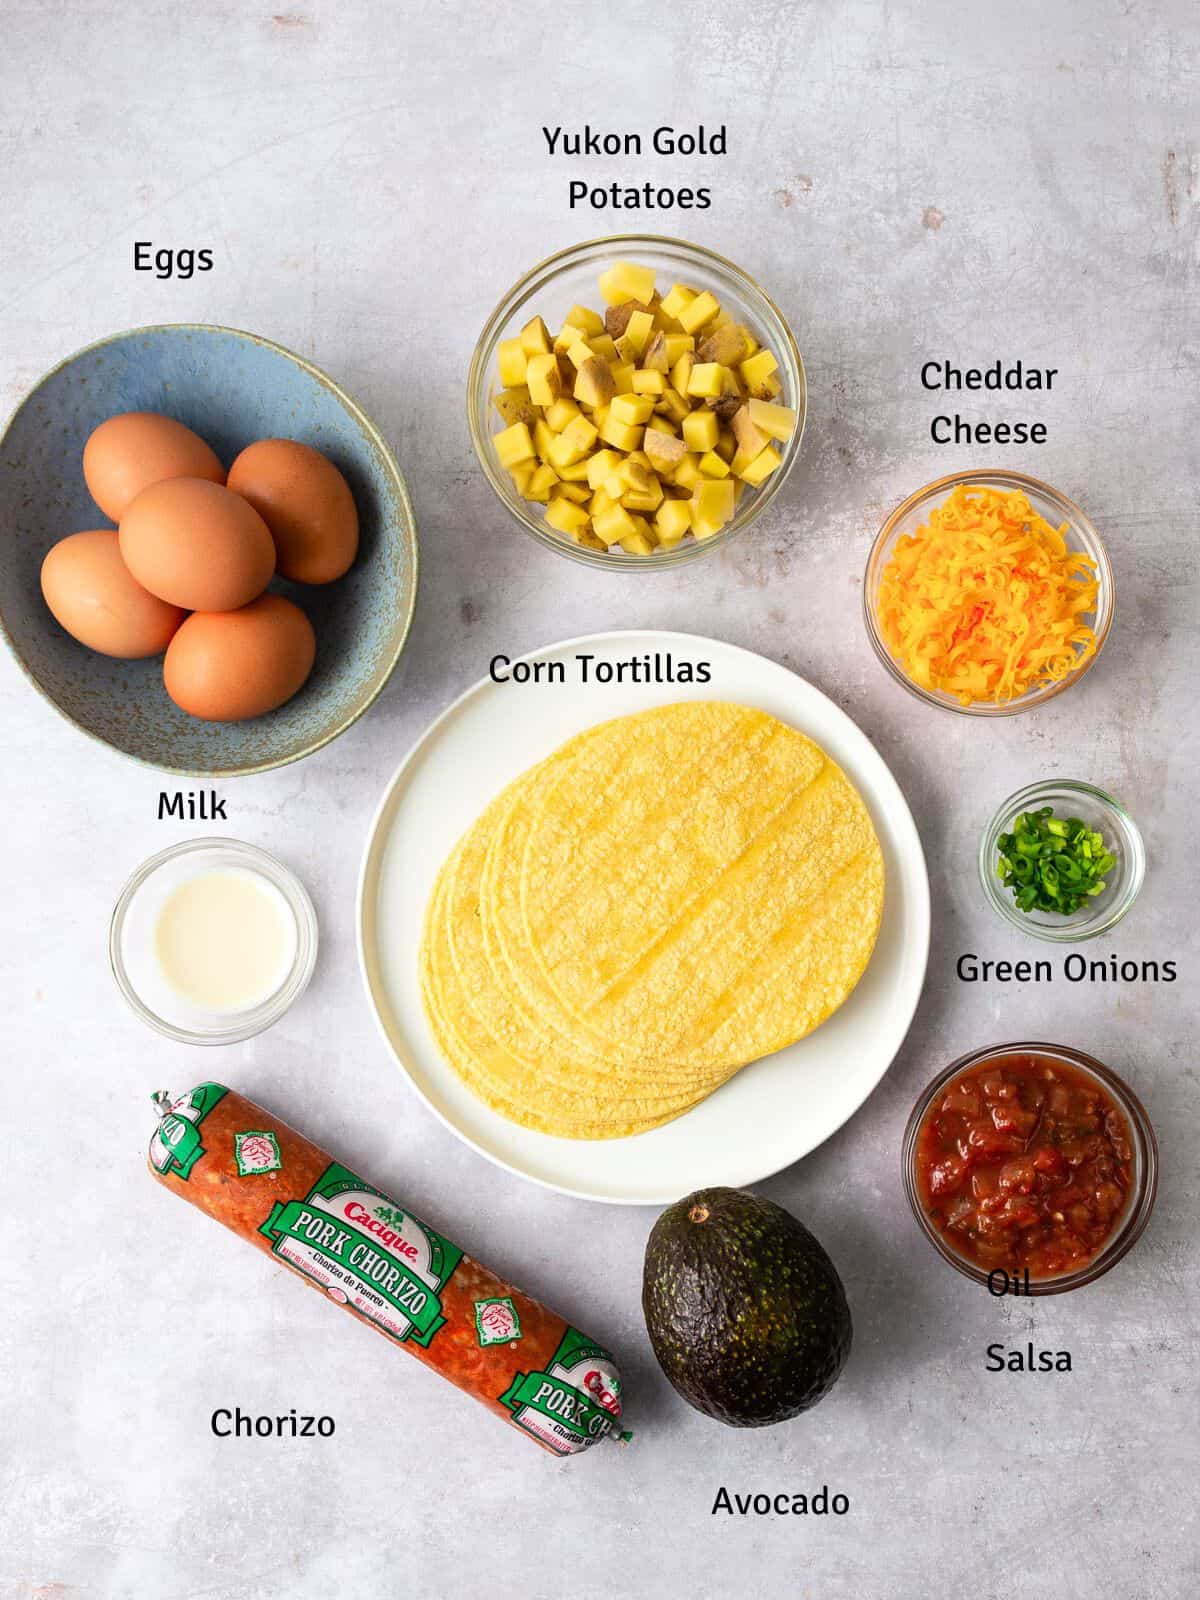 Ingredients for breakfast tacos including chorizo, potatoes and eggs.